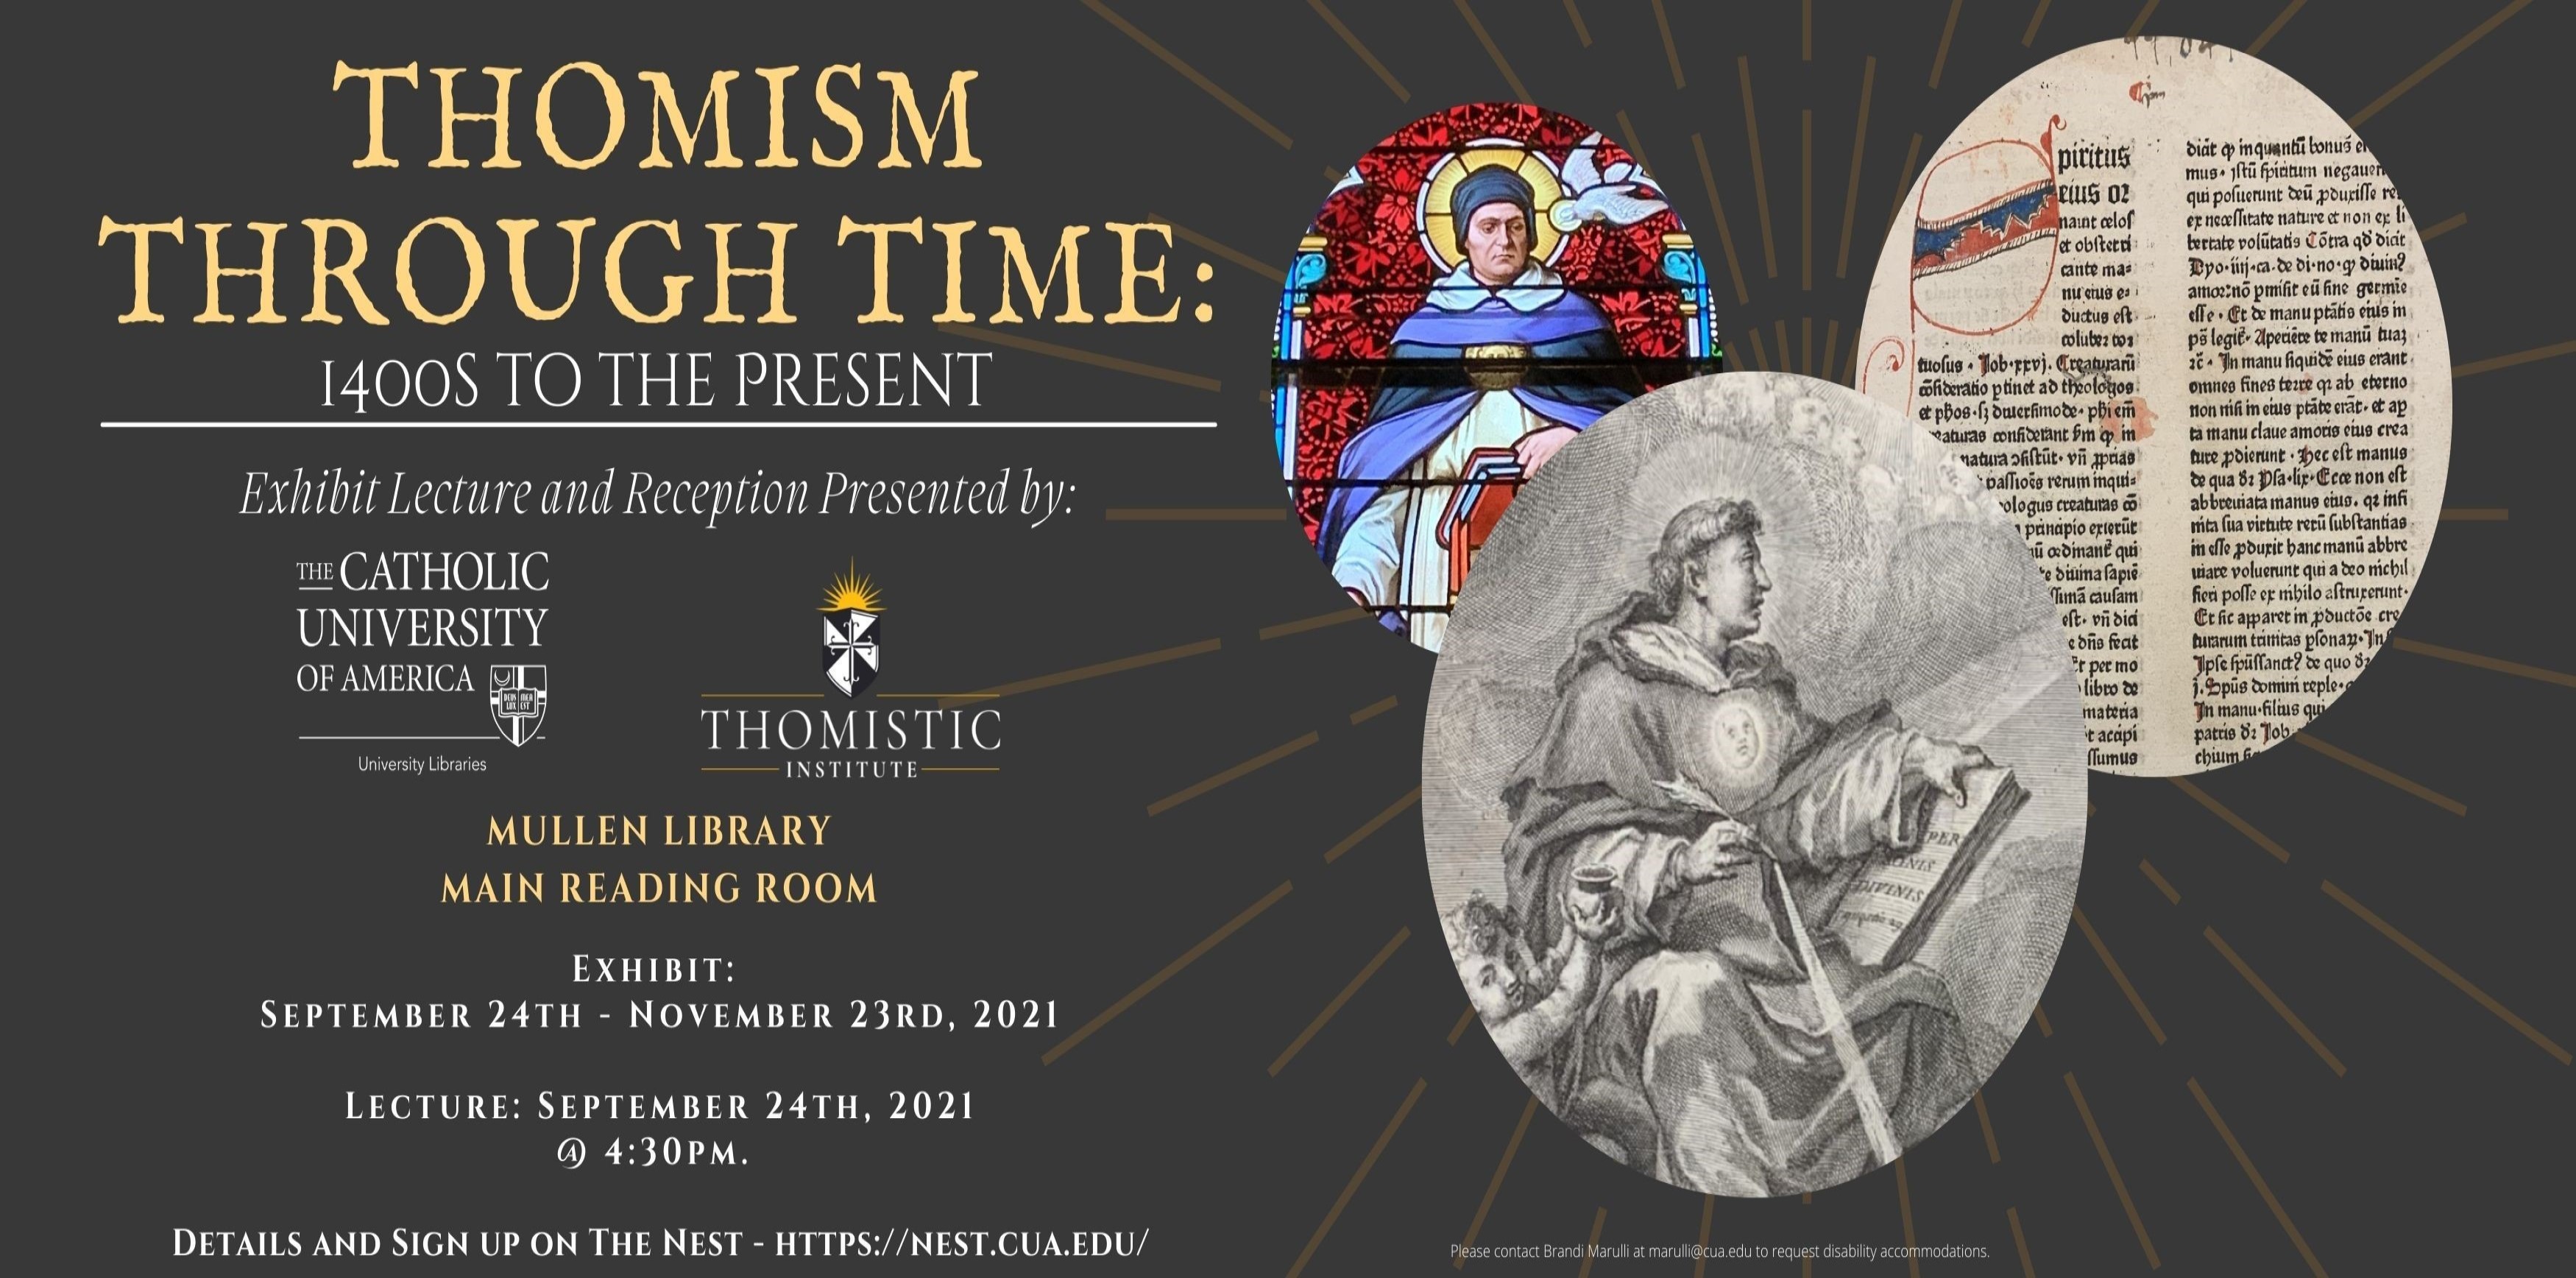 image of the Thomism Through Time Exhibit Lecture and Reception information